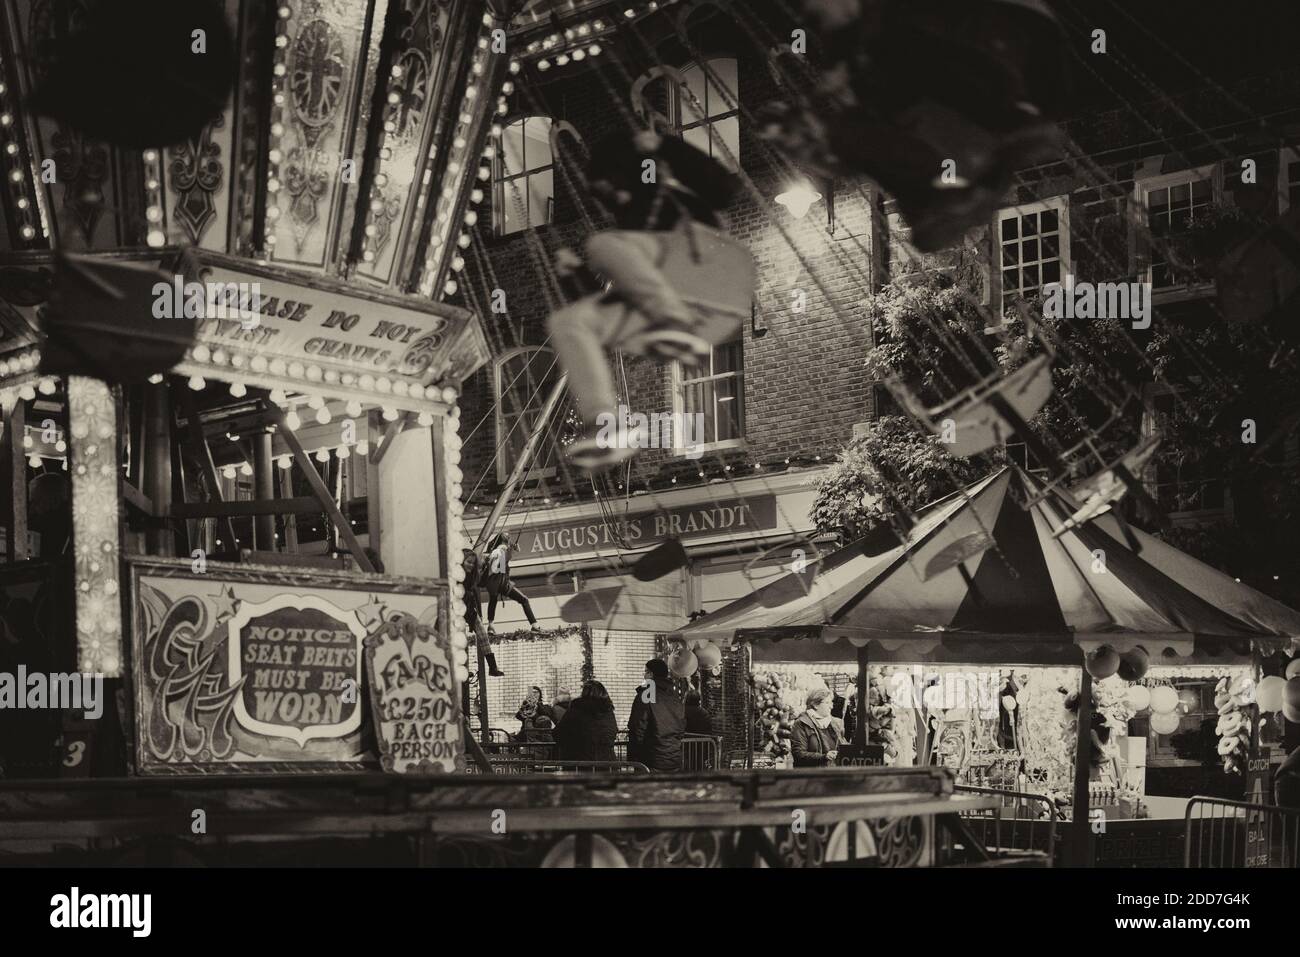 Petworth Fair has been in existance for 800 years by Royal Charter. The Harris family operate the traditional gallopers and chairoplanes dating back 1 Stock Photo